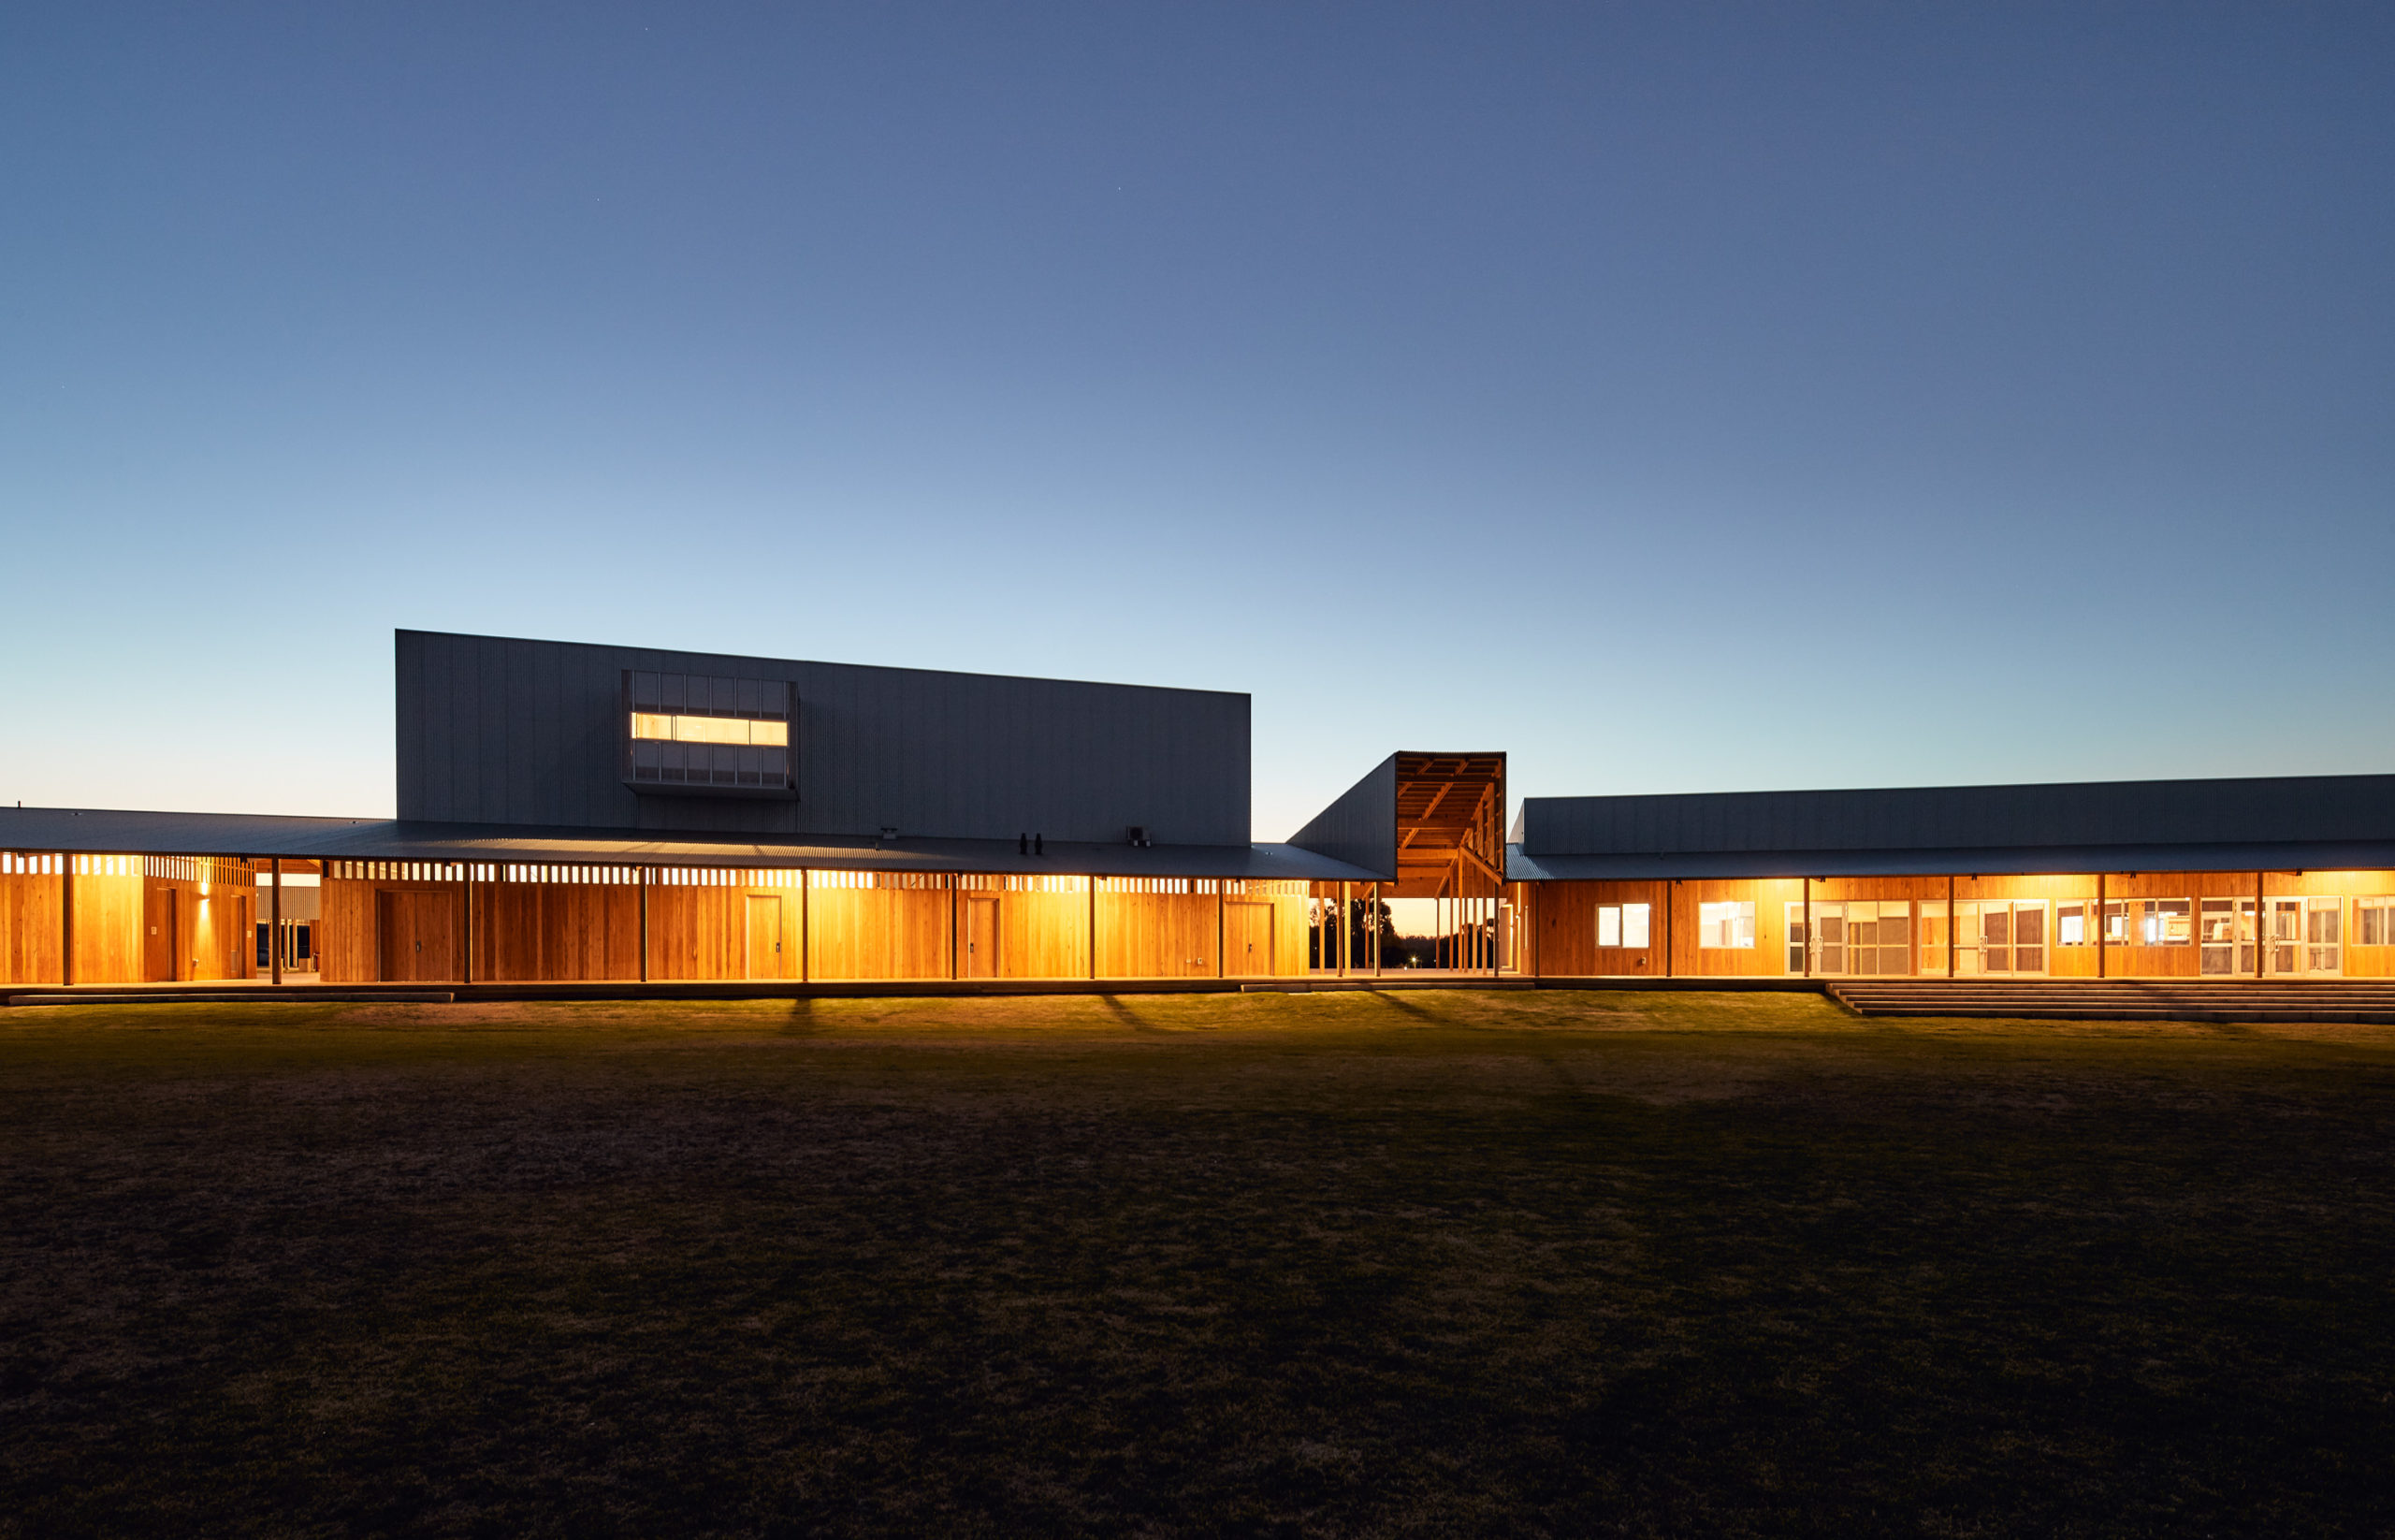 Pingelly Recreation and Cultural Centre by Iredale Pedersen Hook Architects with ATC Studio, Pingelly, Australia